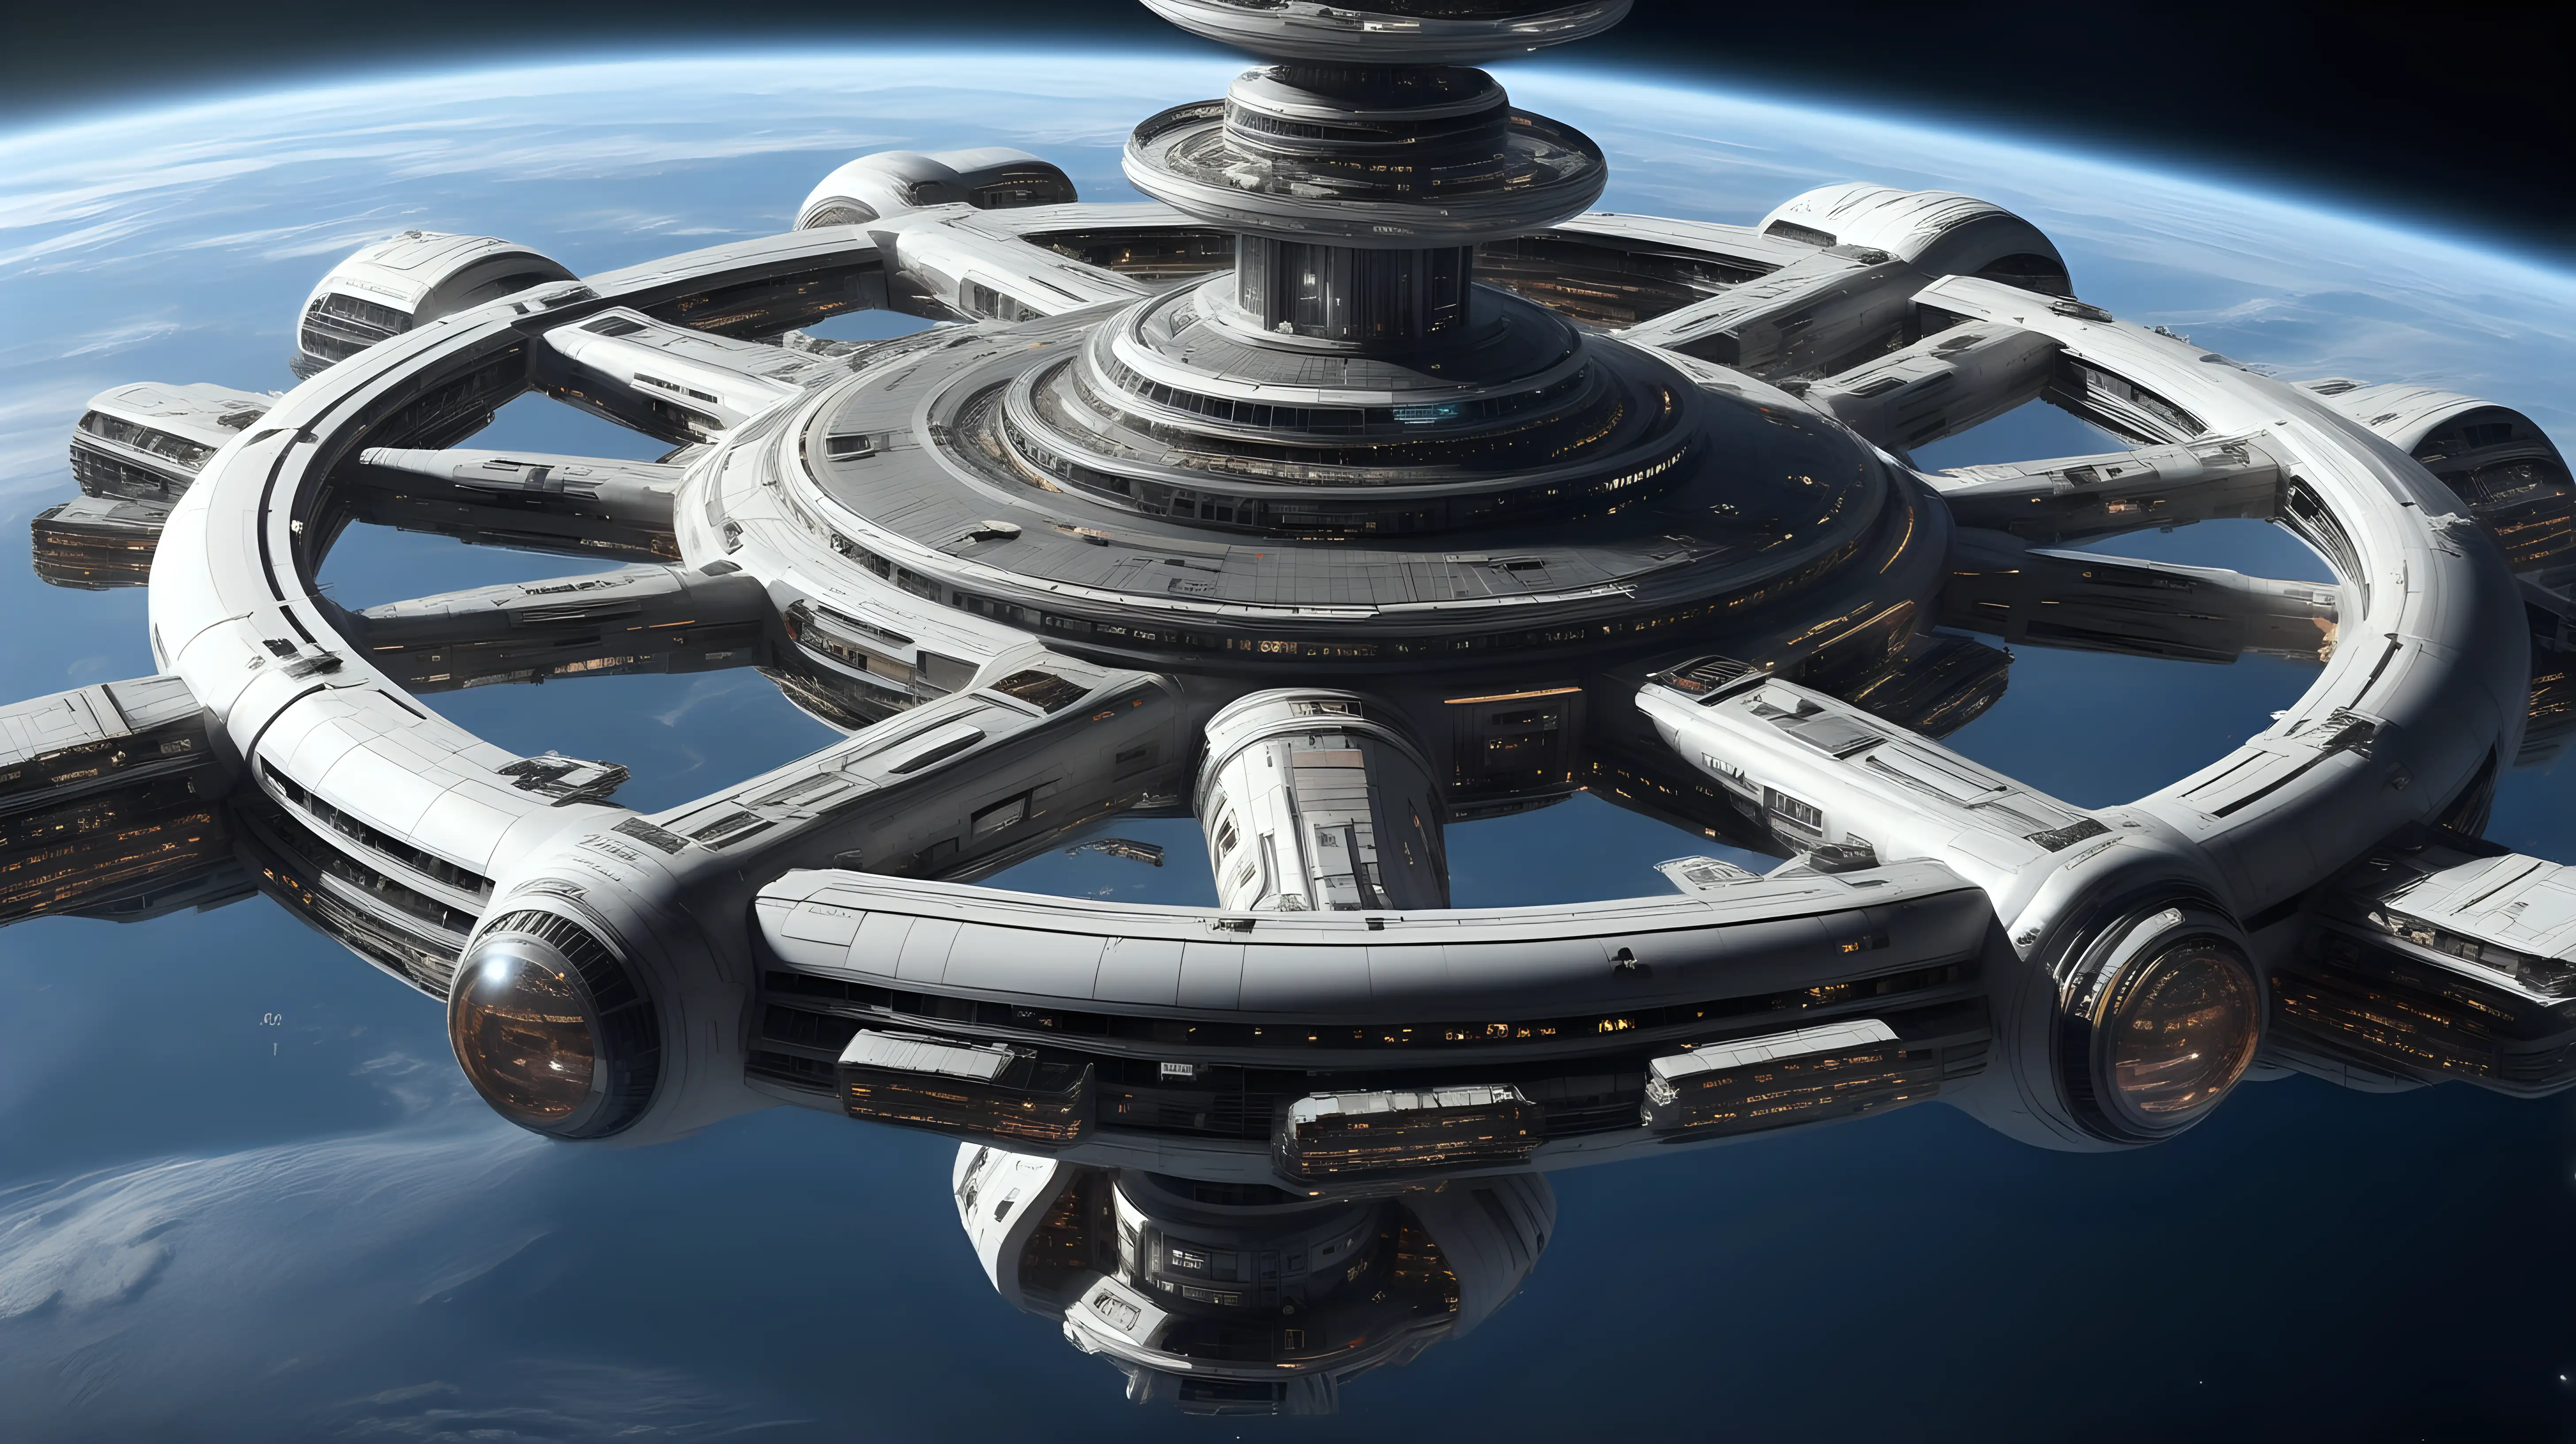 Futuristic Space Station Hub with Docked Spaceships